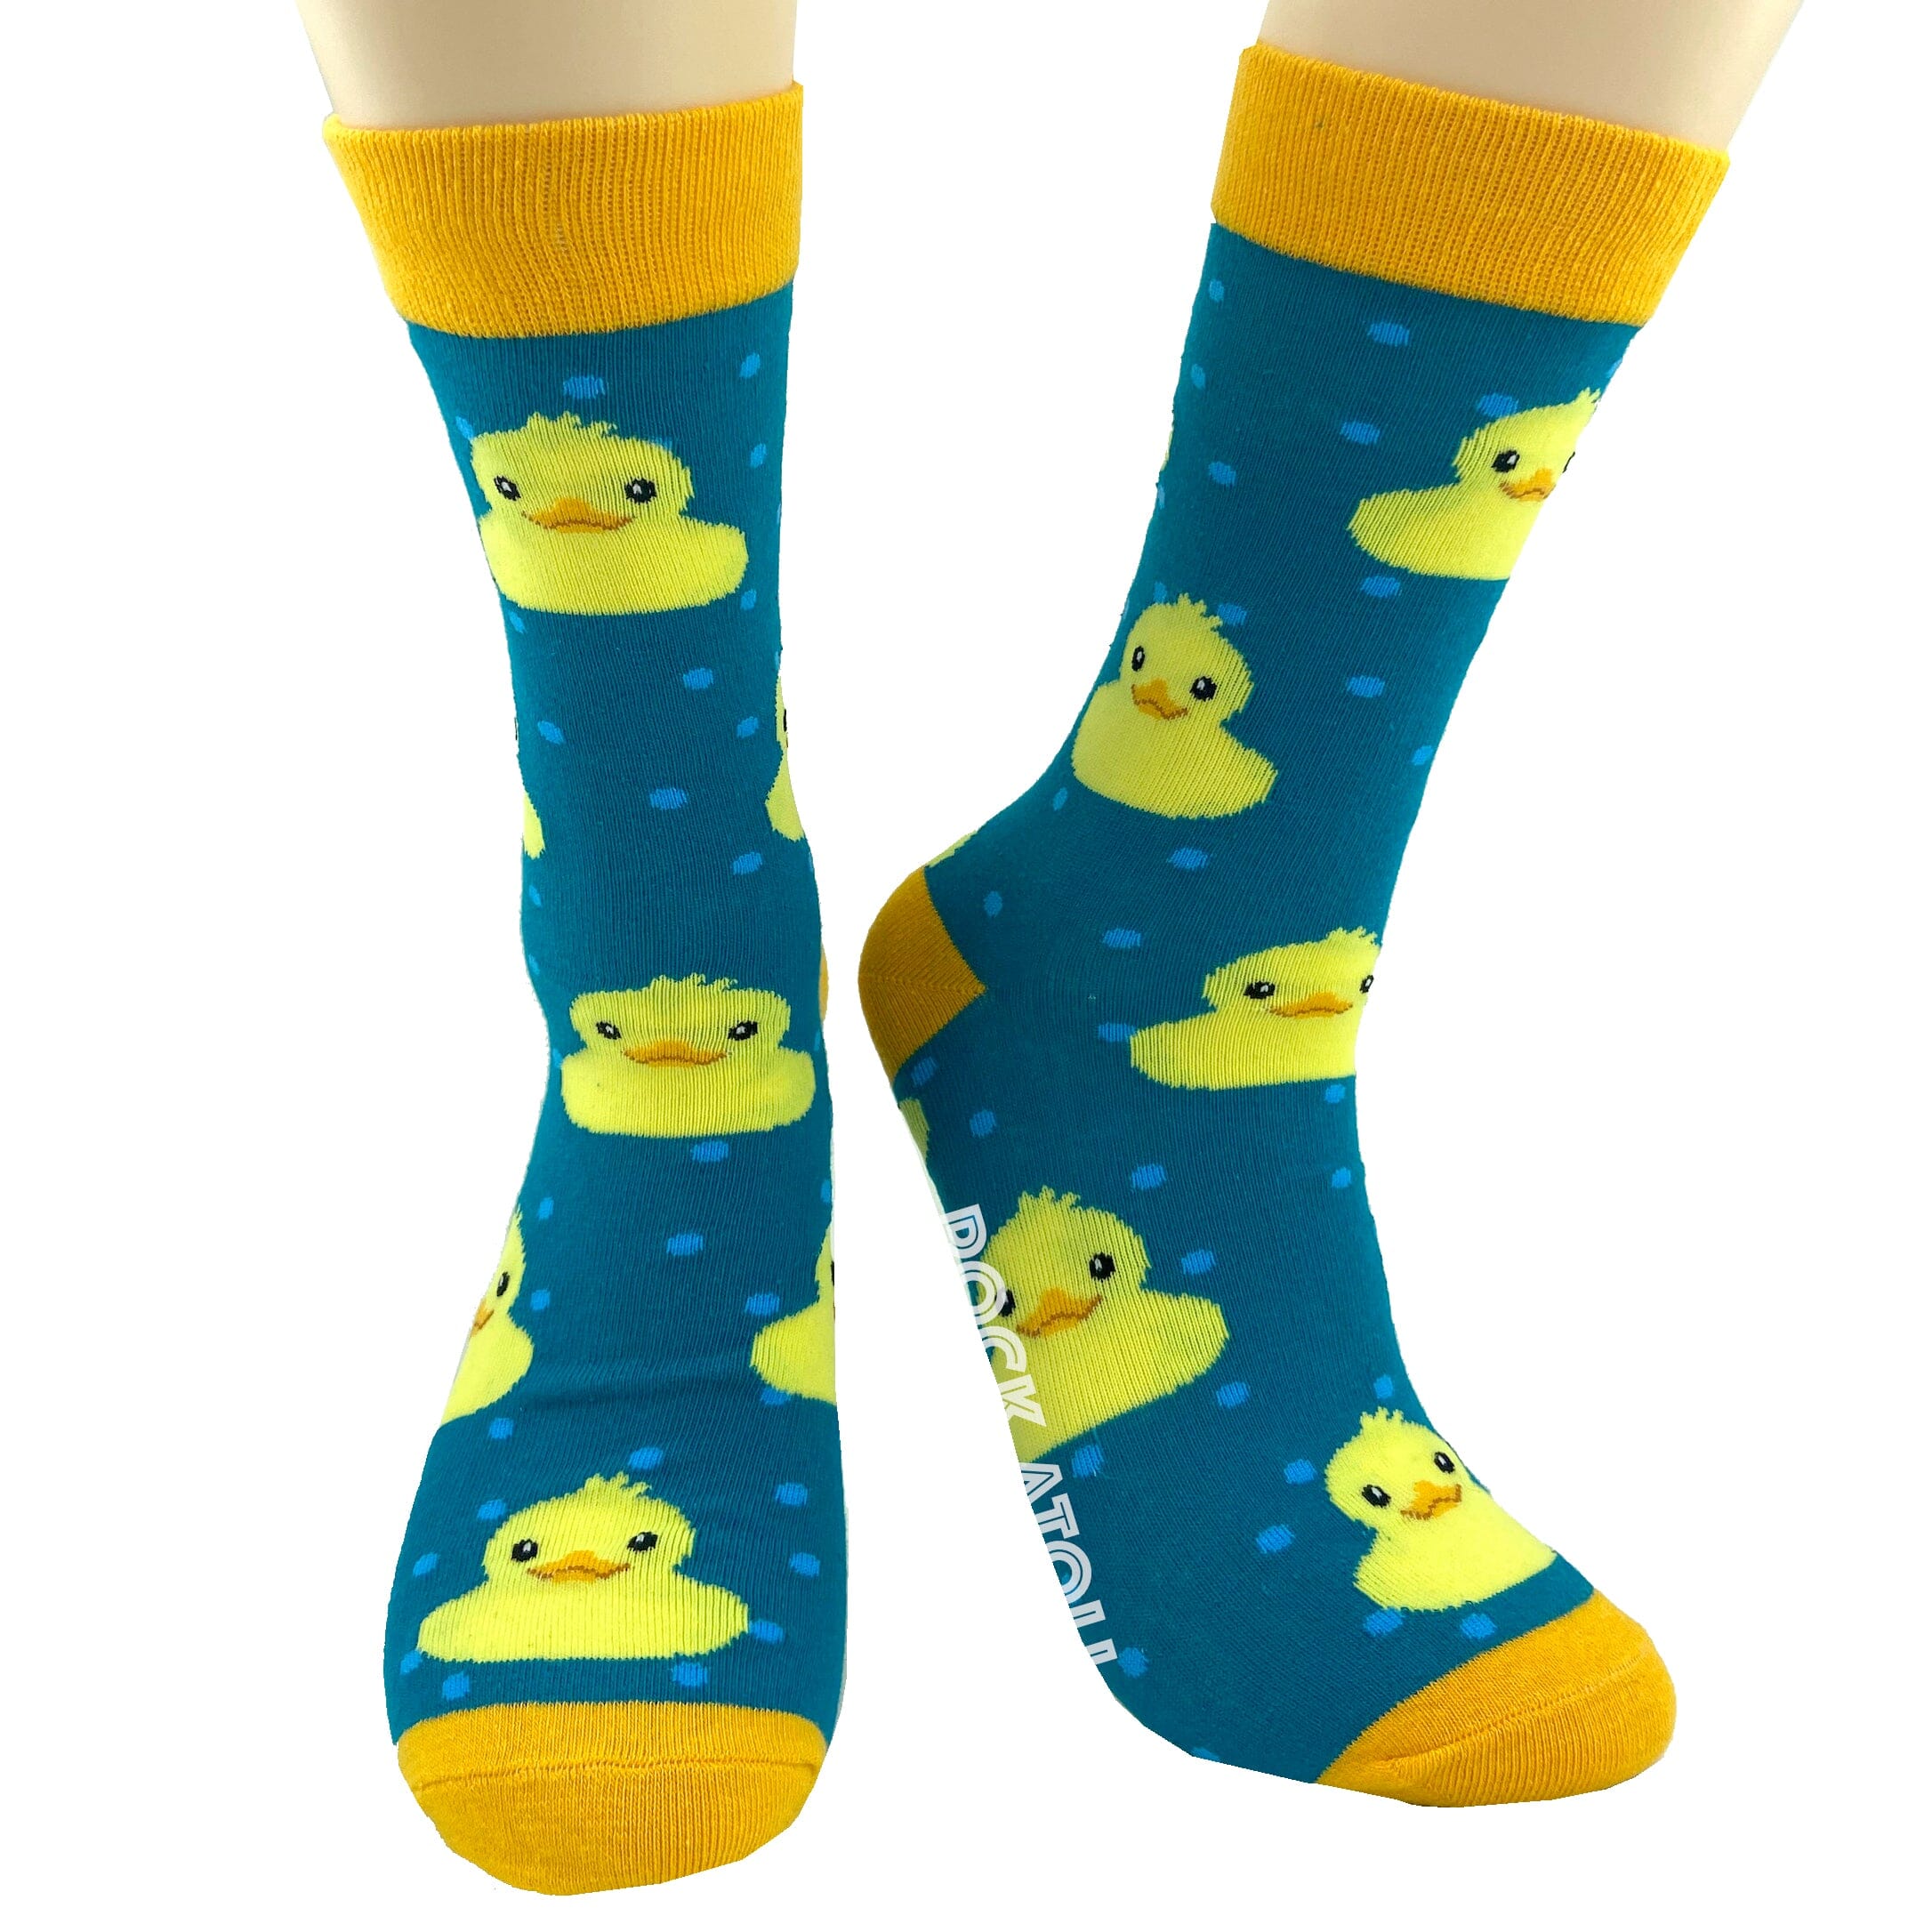 Teal Blue Unisex Yellow Rubber Duck Patterned Comfy Novelty Crew Socks